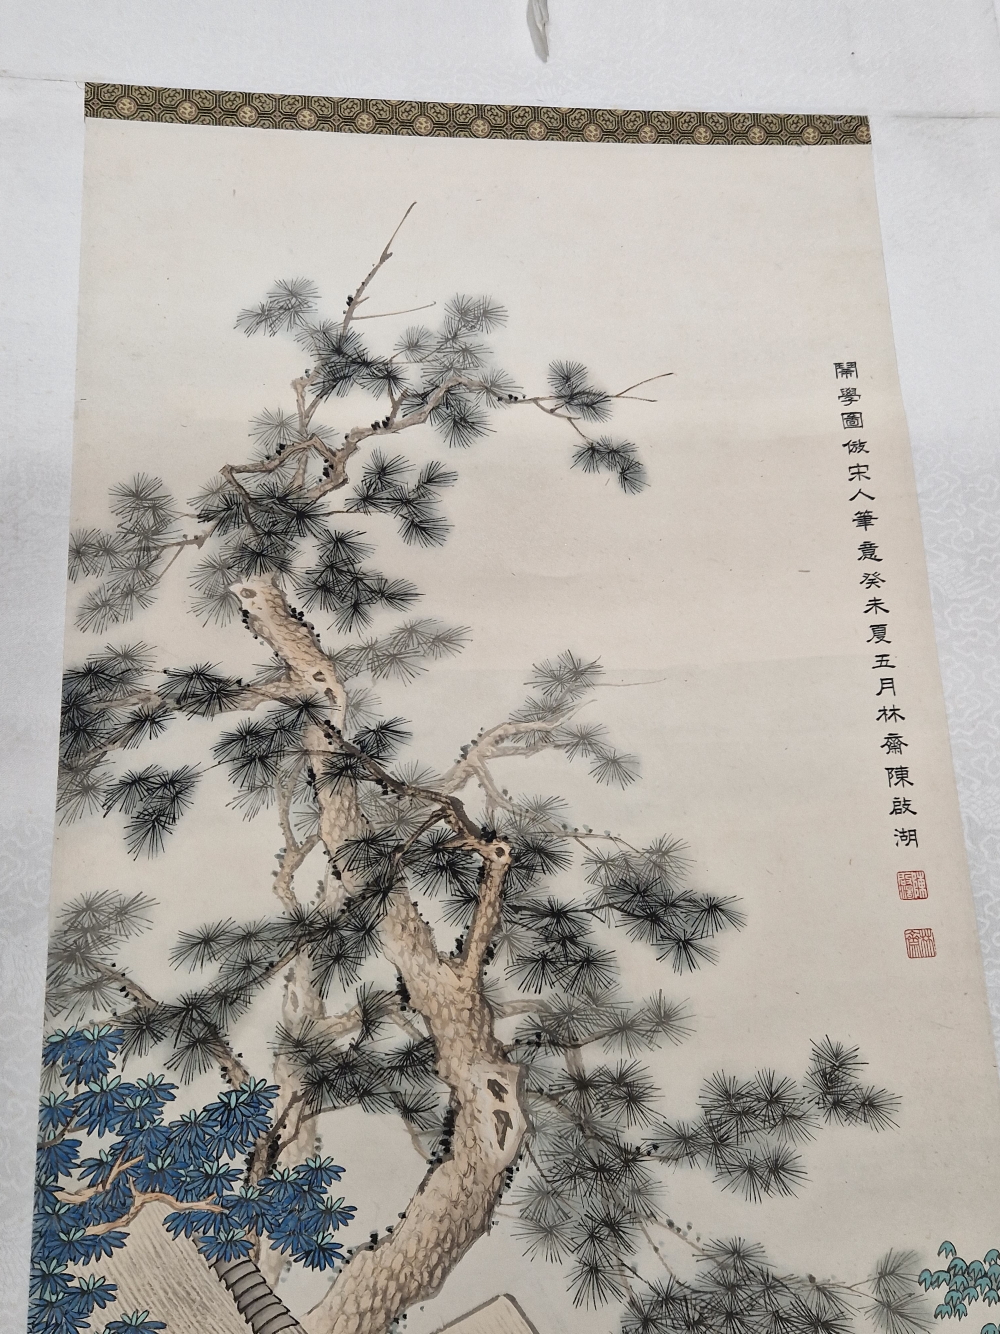 A CHINESE SCROLL PAINTING, FOUR MAGPIES BY CHEN SONG REN, AND ANOTHER PRIMARY SCHOOL IN SUMMER BY - Image 4 of 8